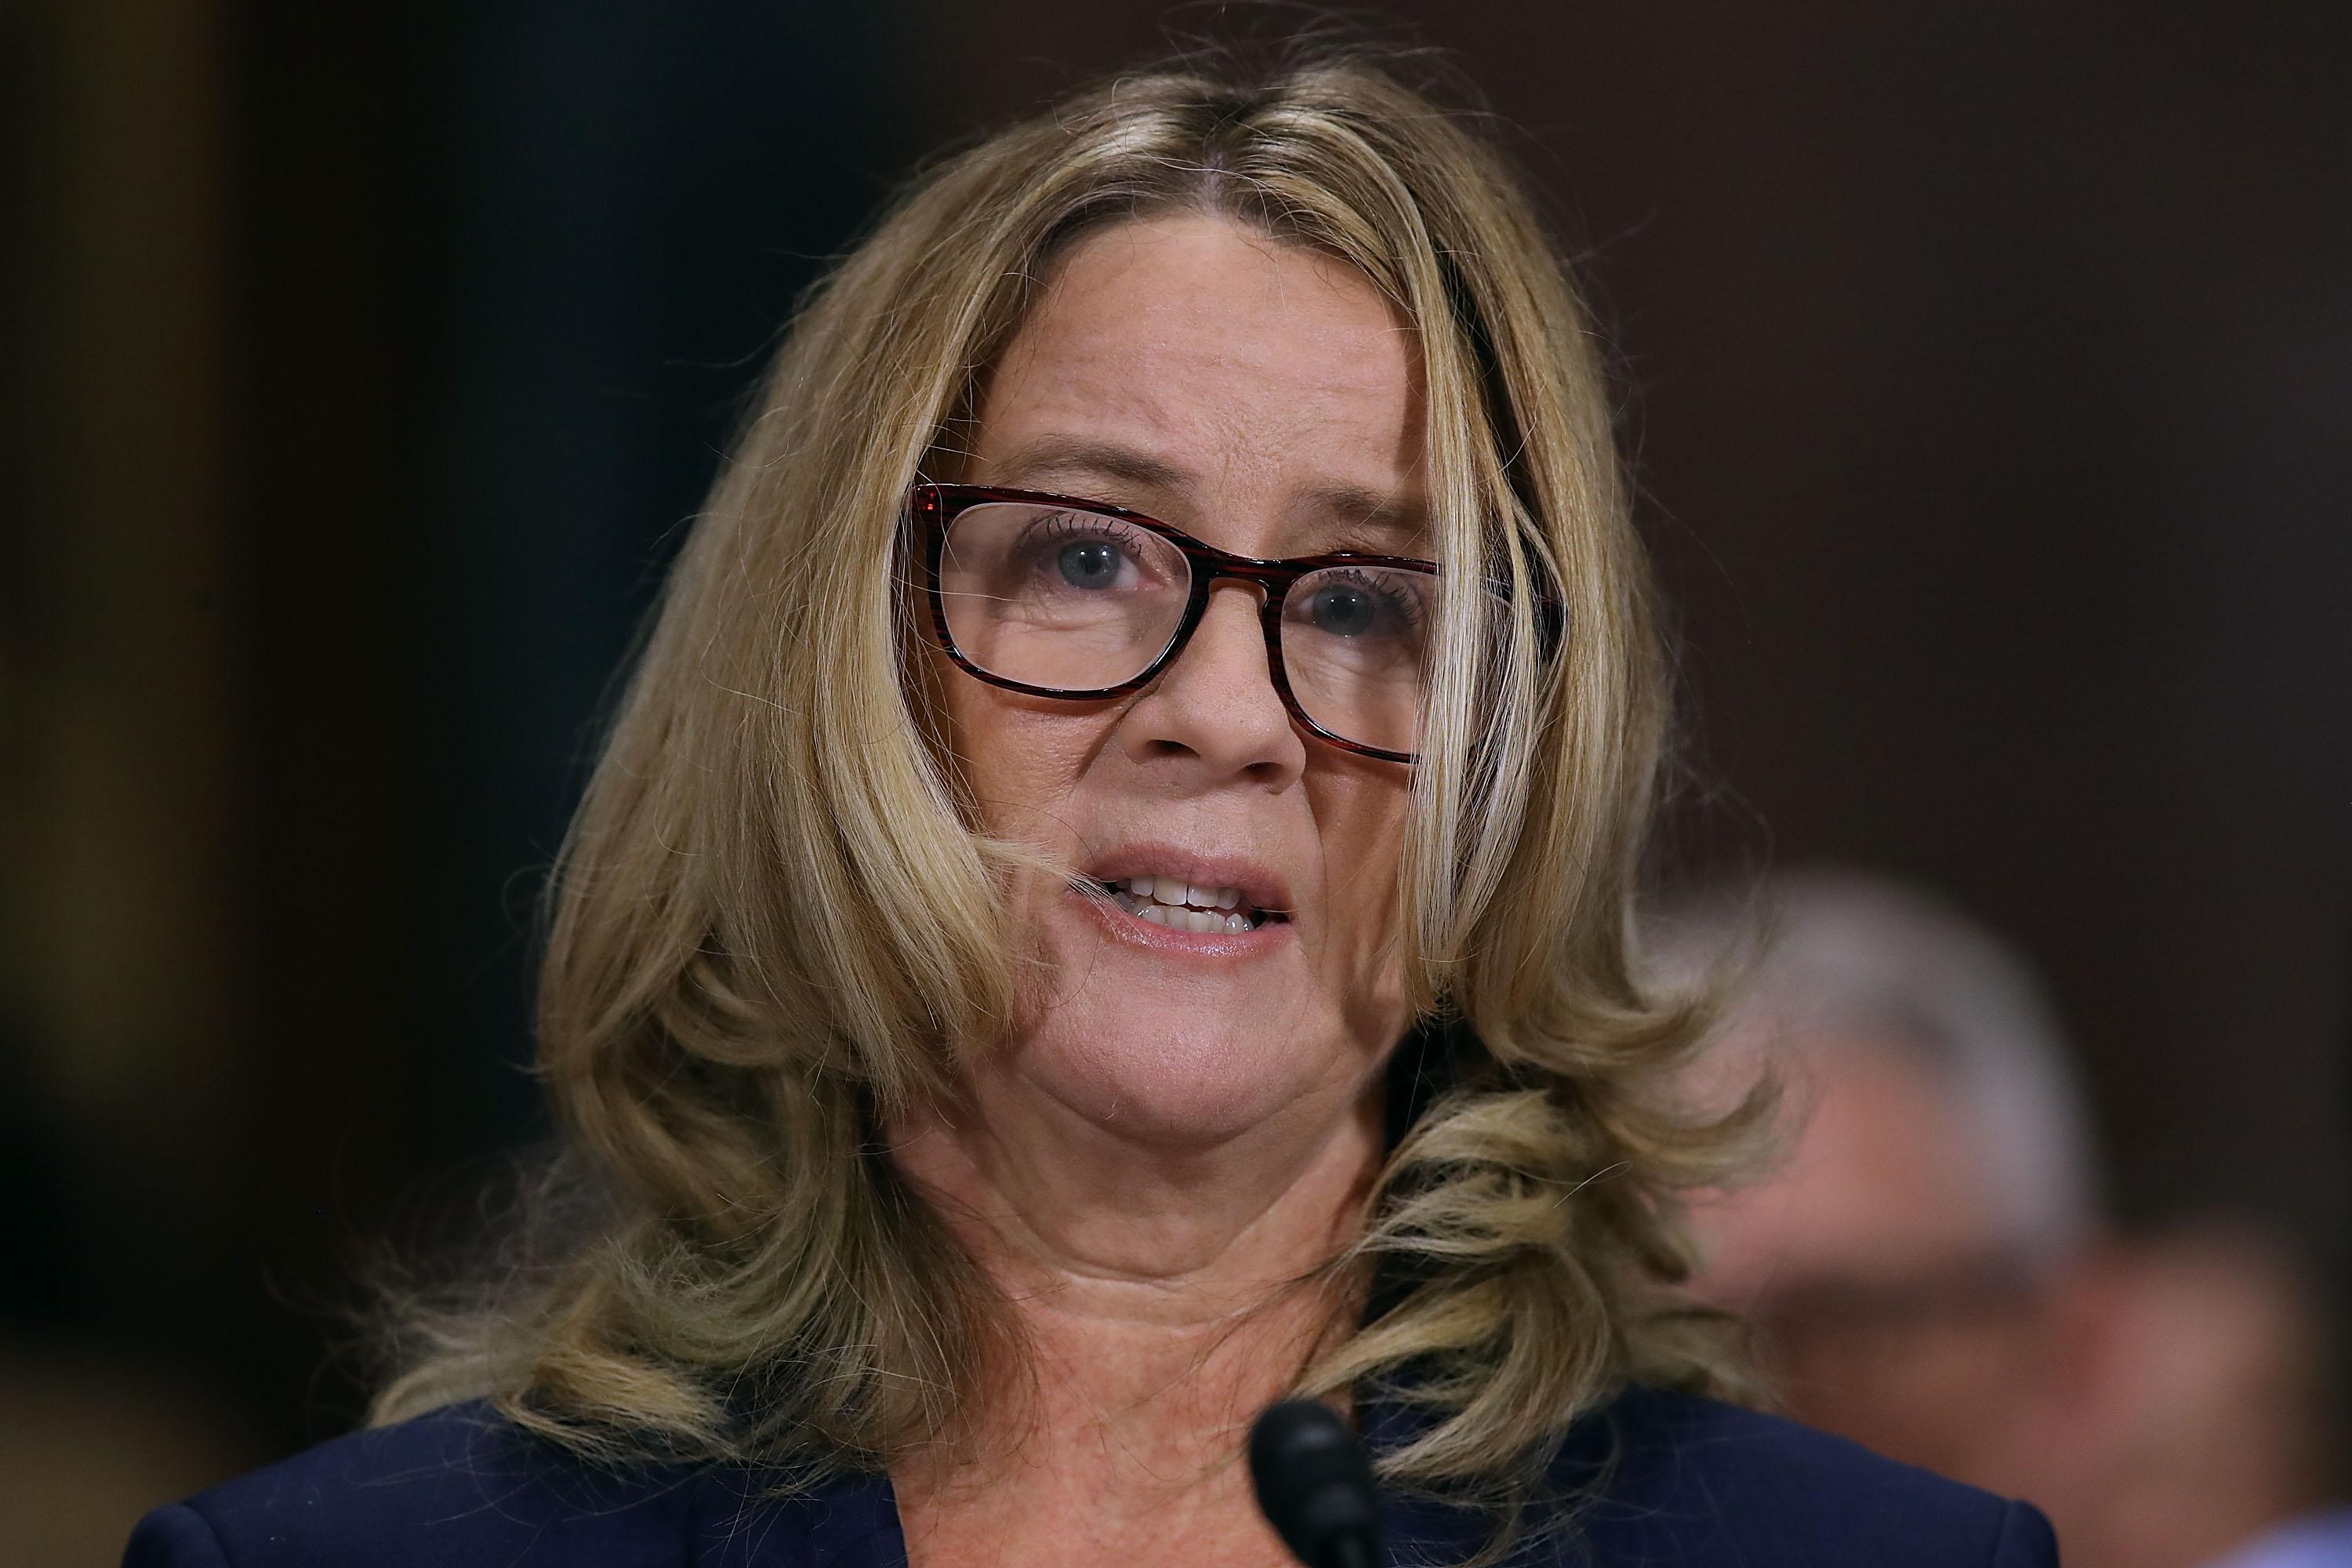 Christine Blasey Ford appears emotional as she speaks before the committee